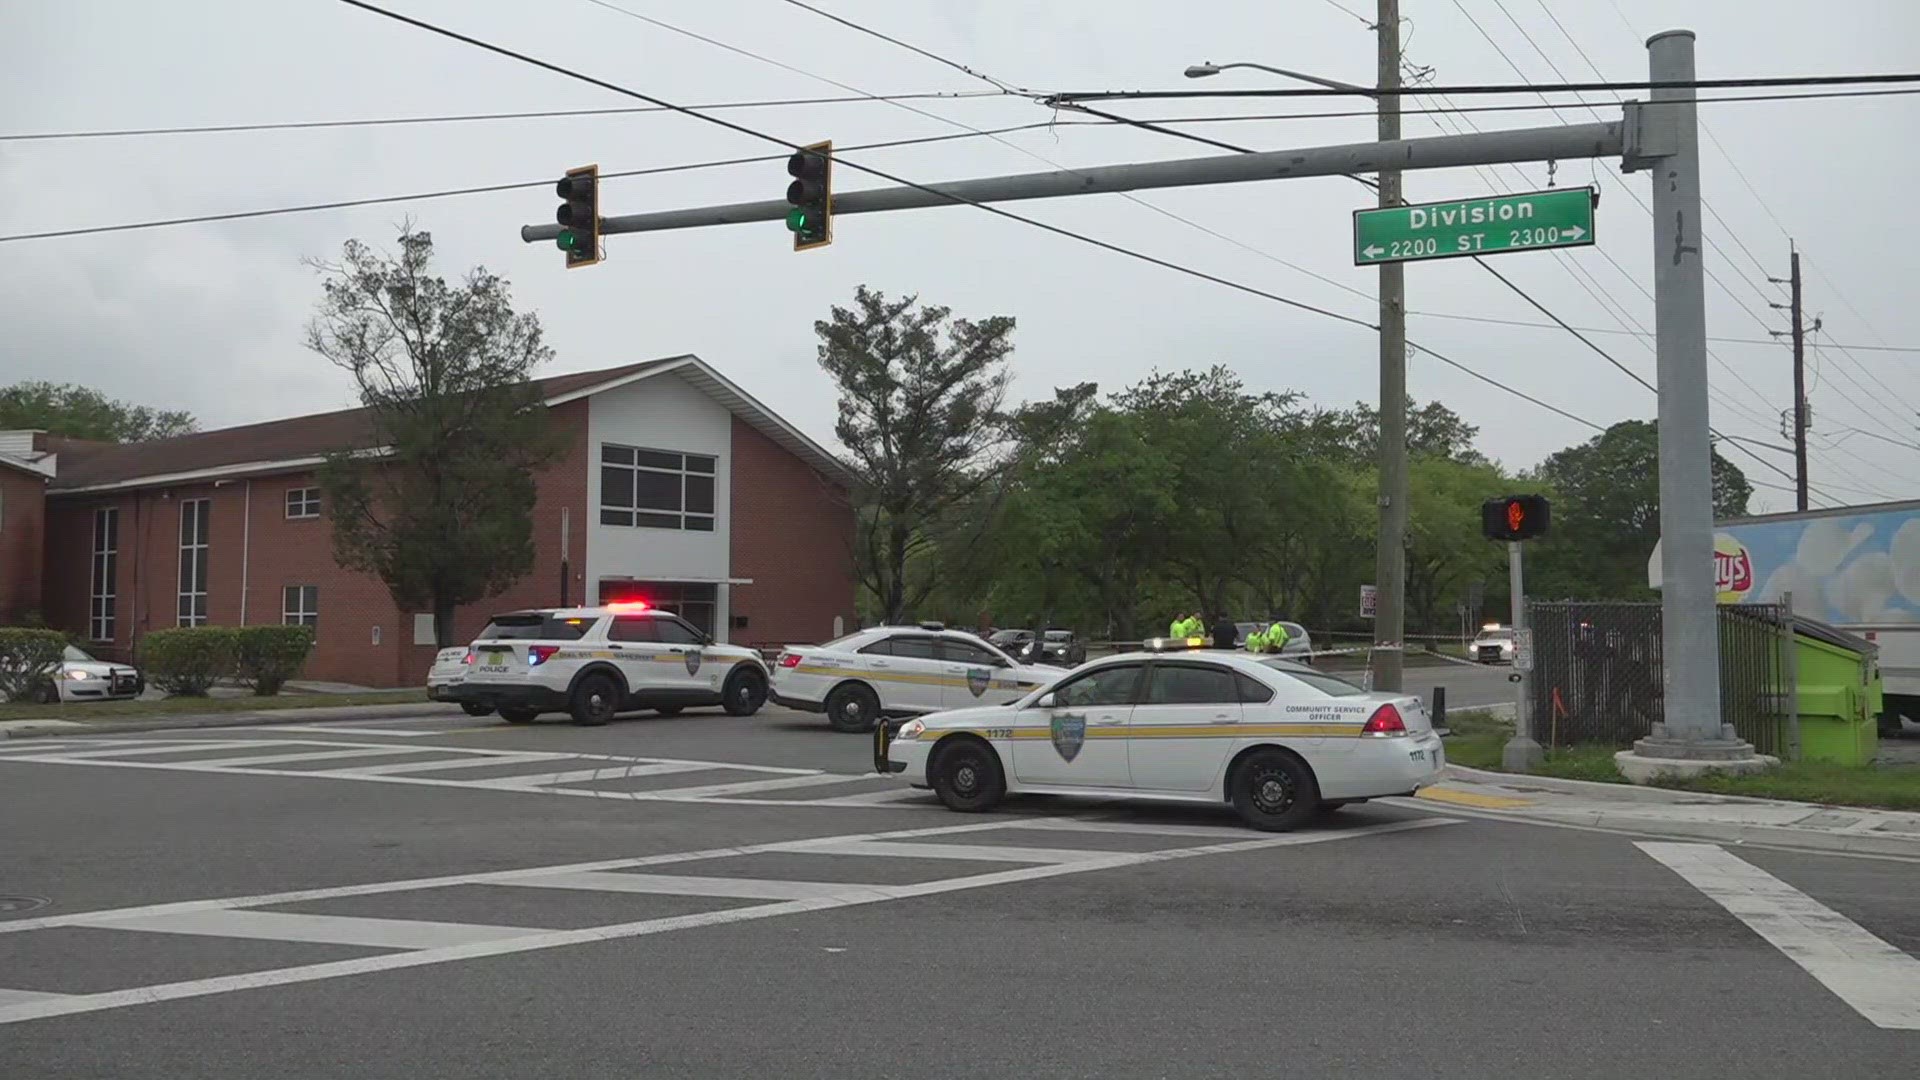 The Jacksonville Sheriff's Office says the teen was with his 12-year-old brother at the time he was hit; they both were on their way to school.